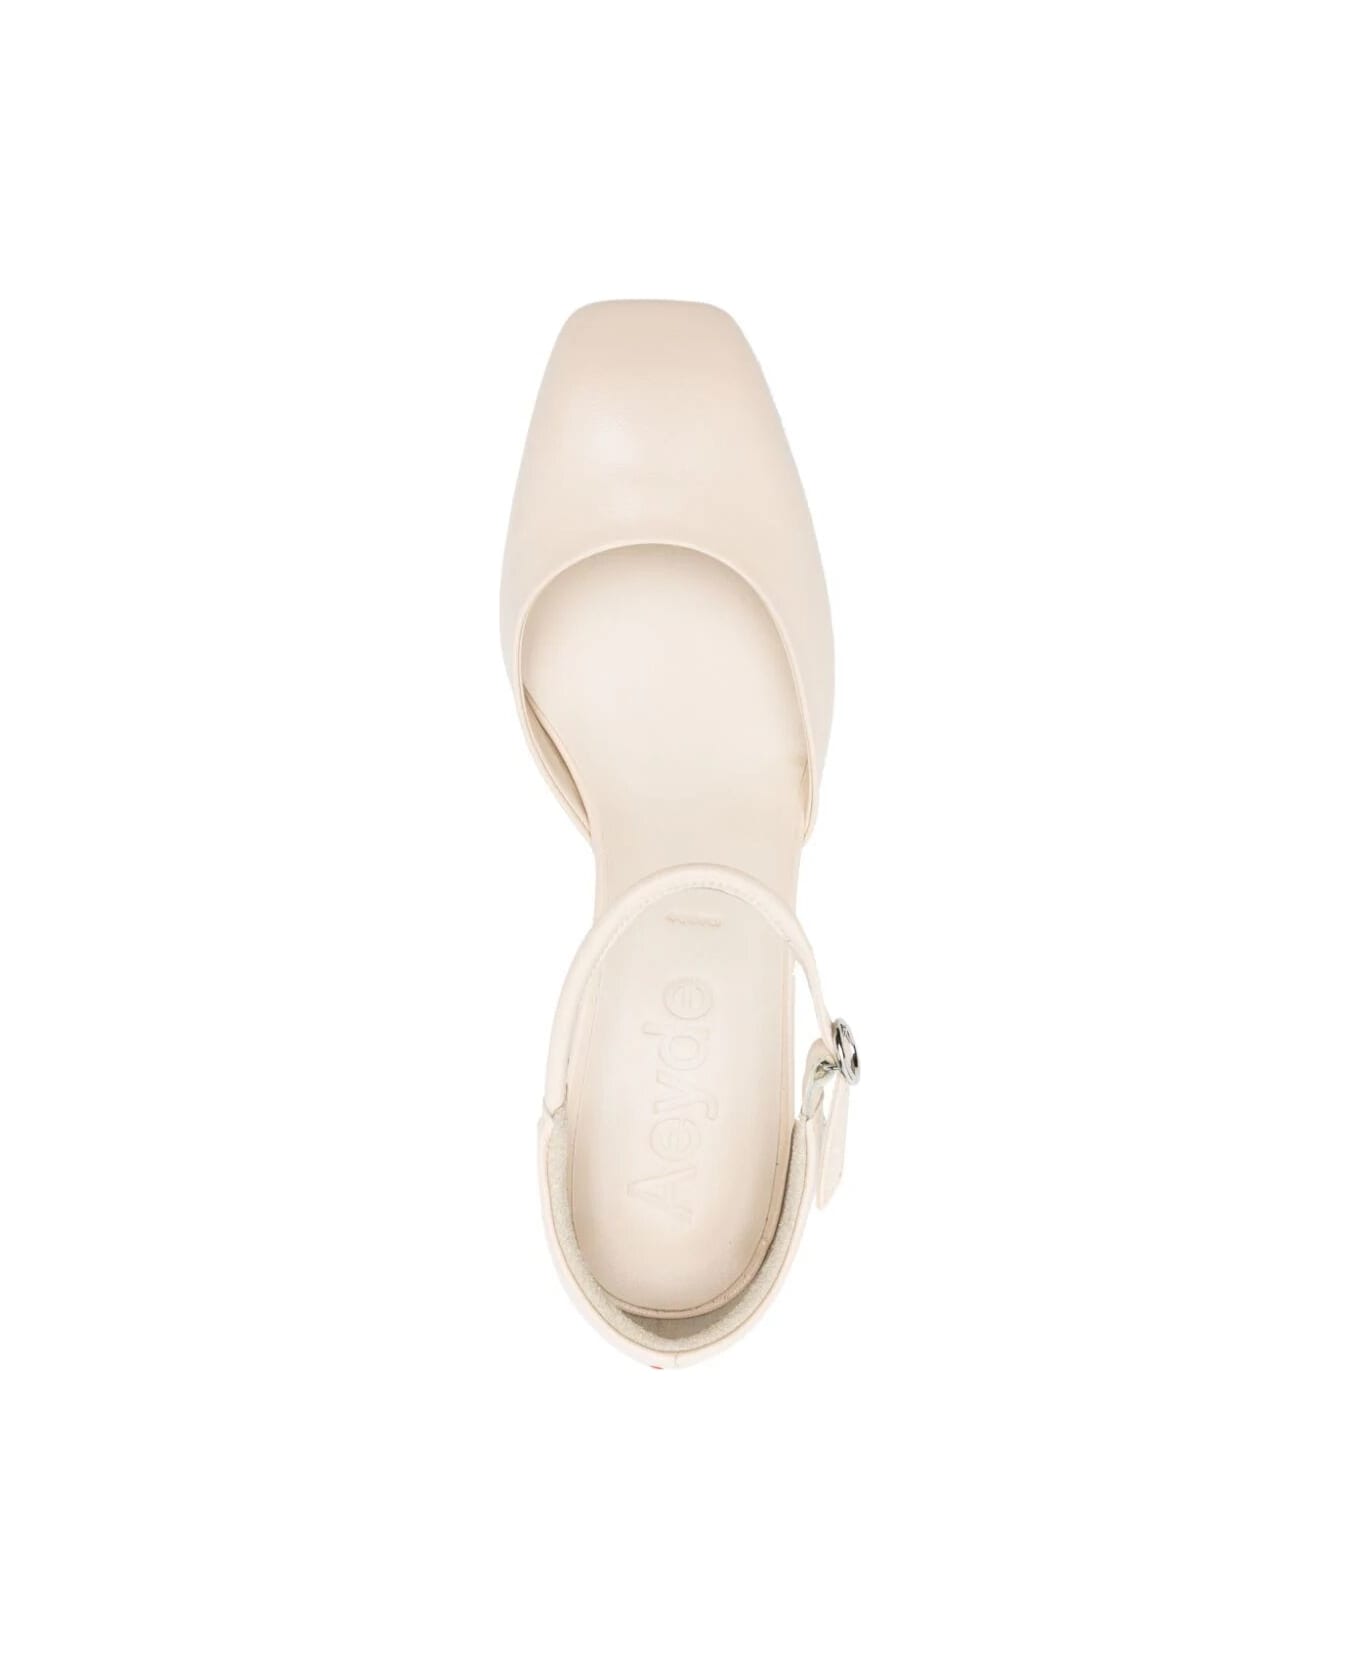 aeyde Magda Nappa Leather Creamy Shoes - Creamy